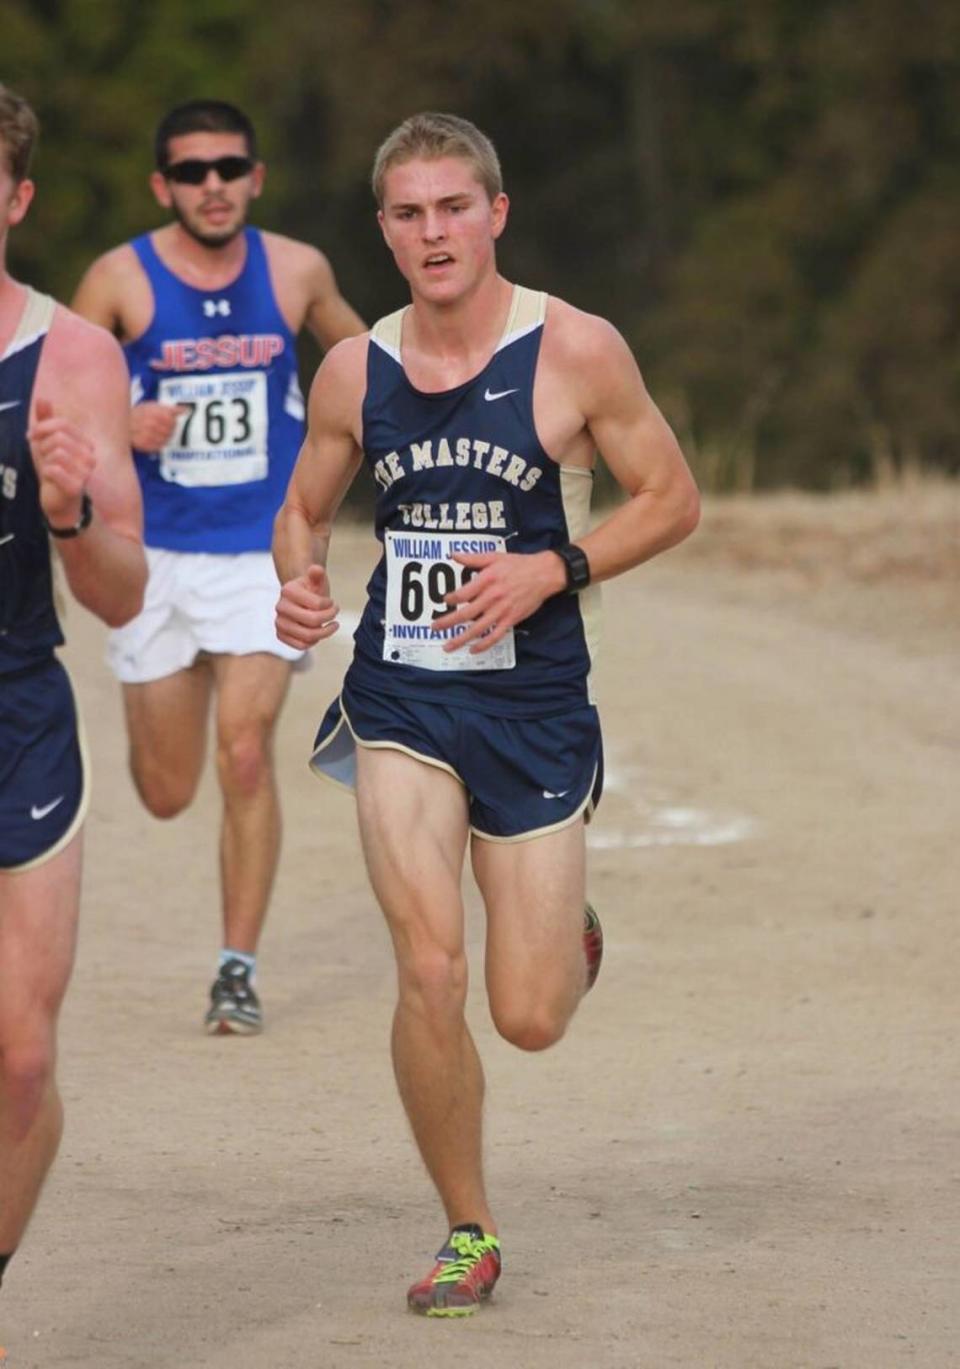 Tobin Bolter graduated from The Master’s University in Santa Clarita, California, in 2017 with a degree in business administration. While in college, Bolter was a member of the cross country and track and field teams. “Tobin was a passionate follower of the lord Jesus Christ,” TMU cross country and track and field coach Zach Schroeder said in a statement. “In life, his desire was to know Christ and make Him known to the world."